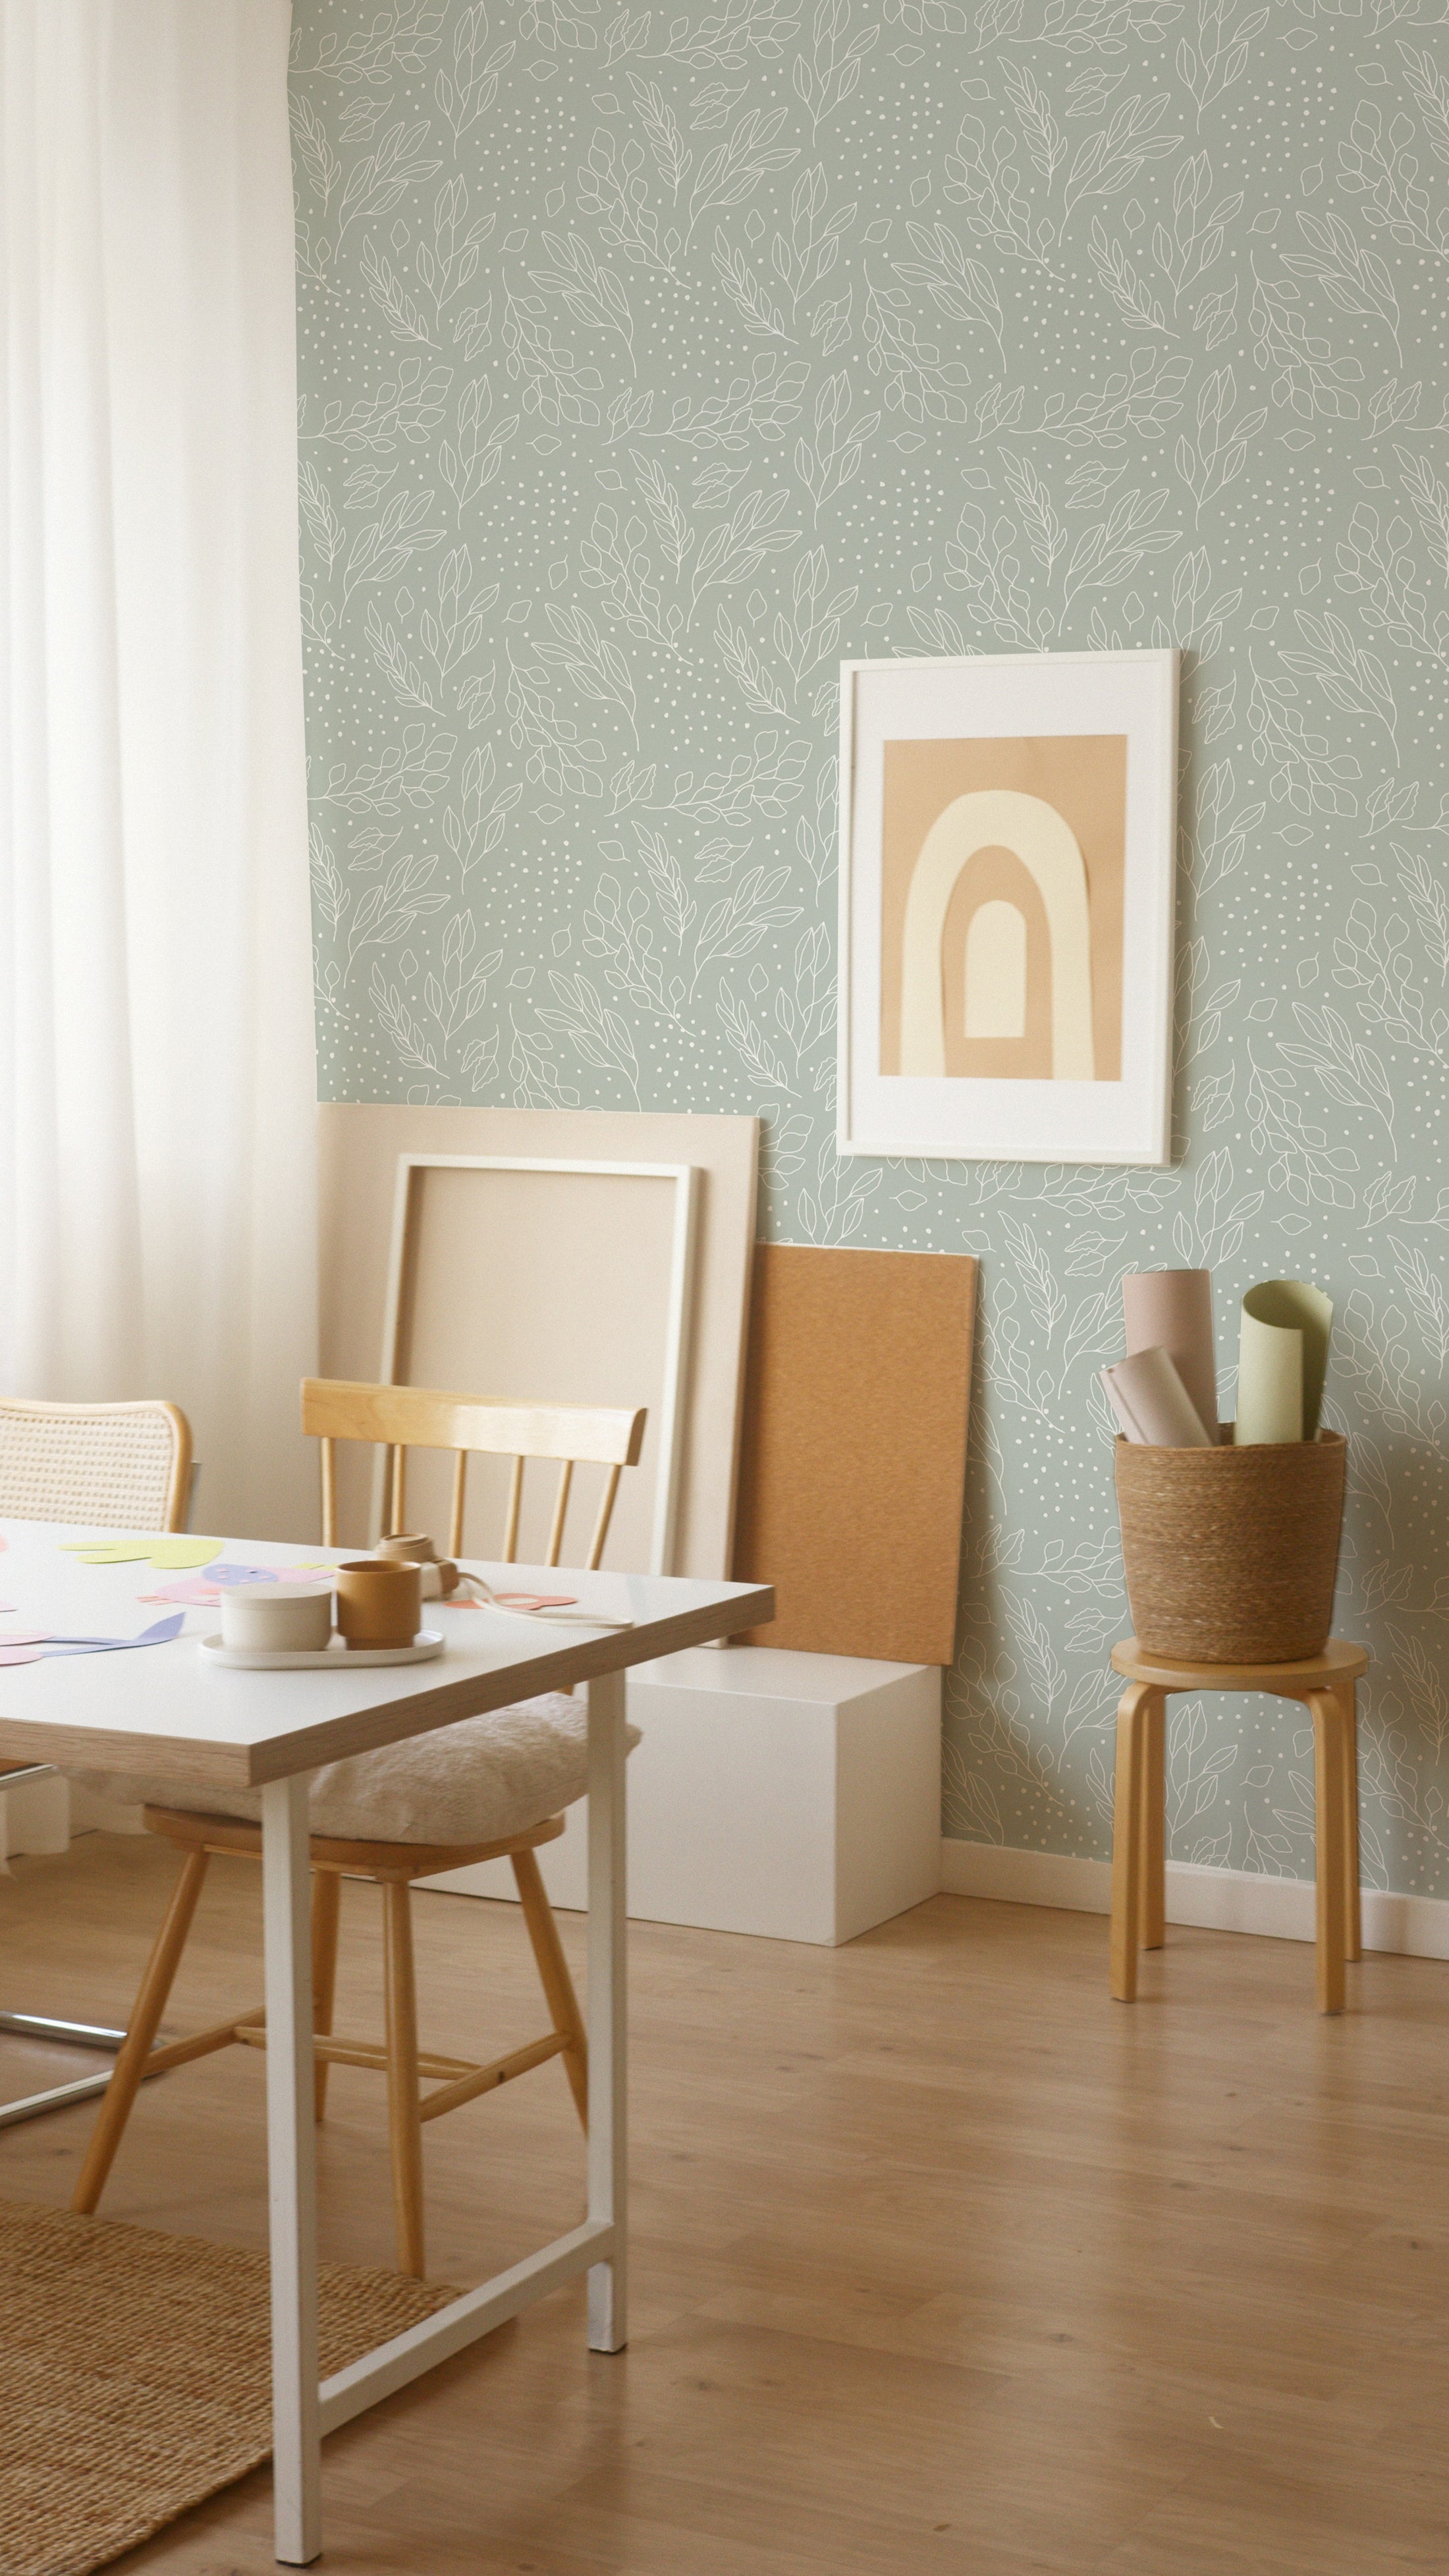 Creative workspace enhanced by the Ferns and Leaves Wallpaper, which adds a calm and nature-inspired vibe with its soft green leafy pattern. The scene includes a simple wooden desk, a chair, and inspirational art, ideal for fostering creativity